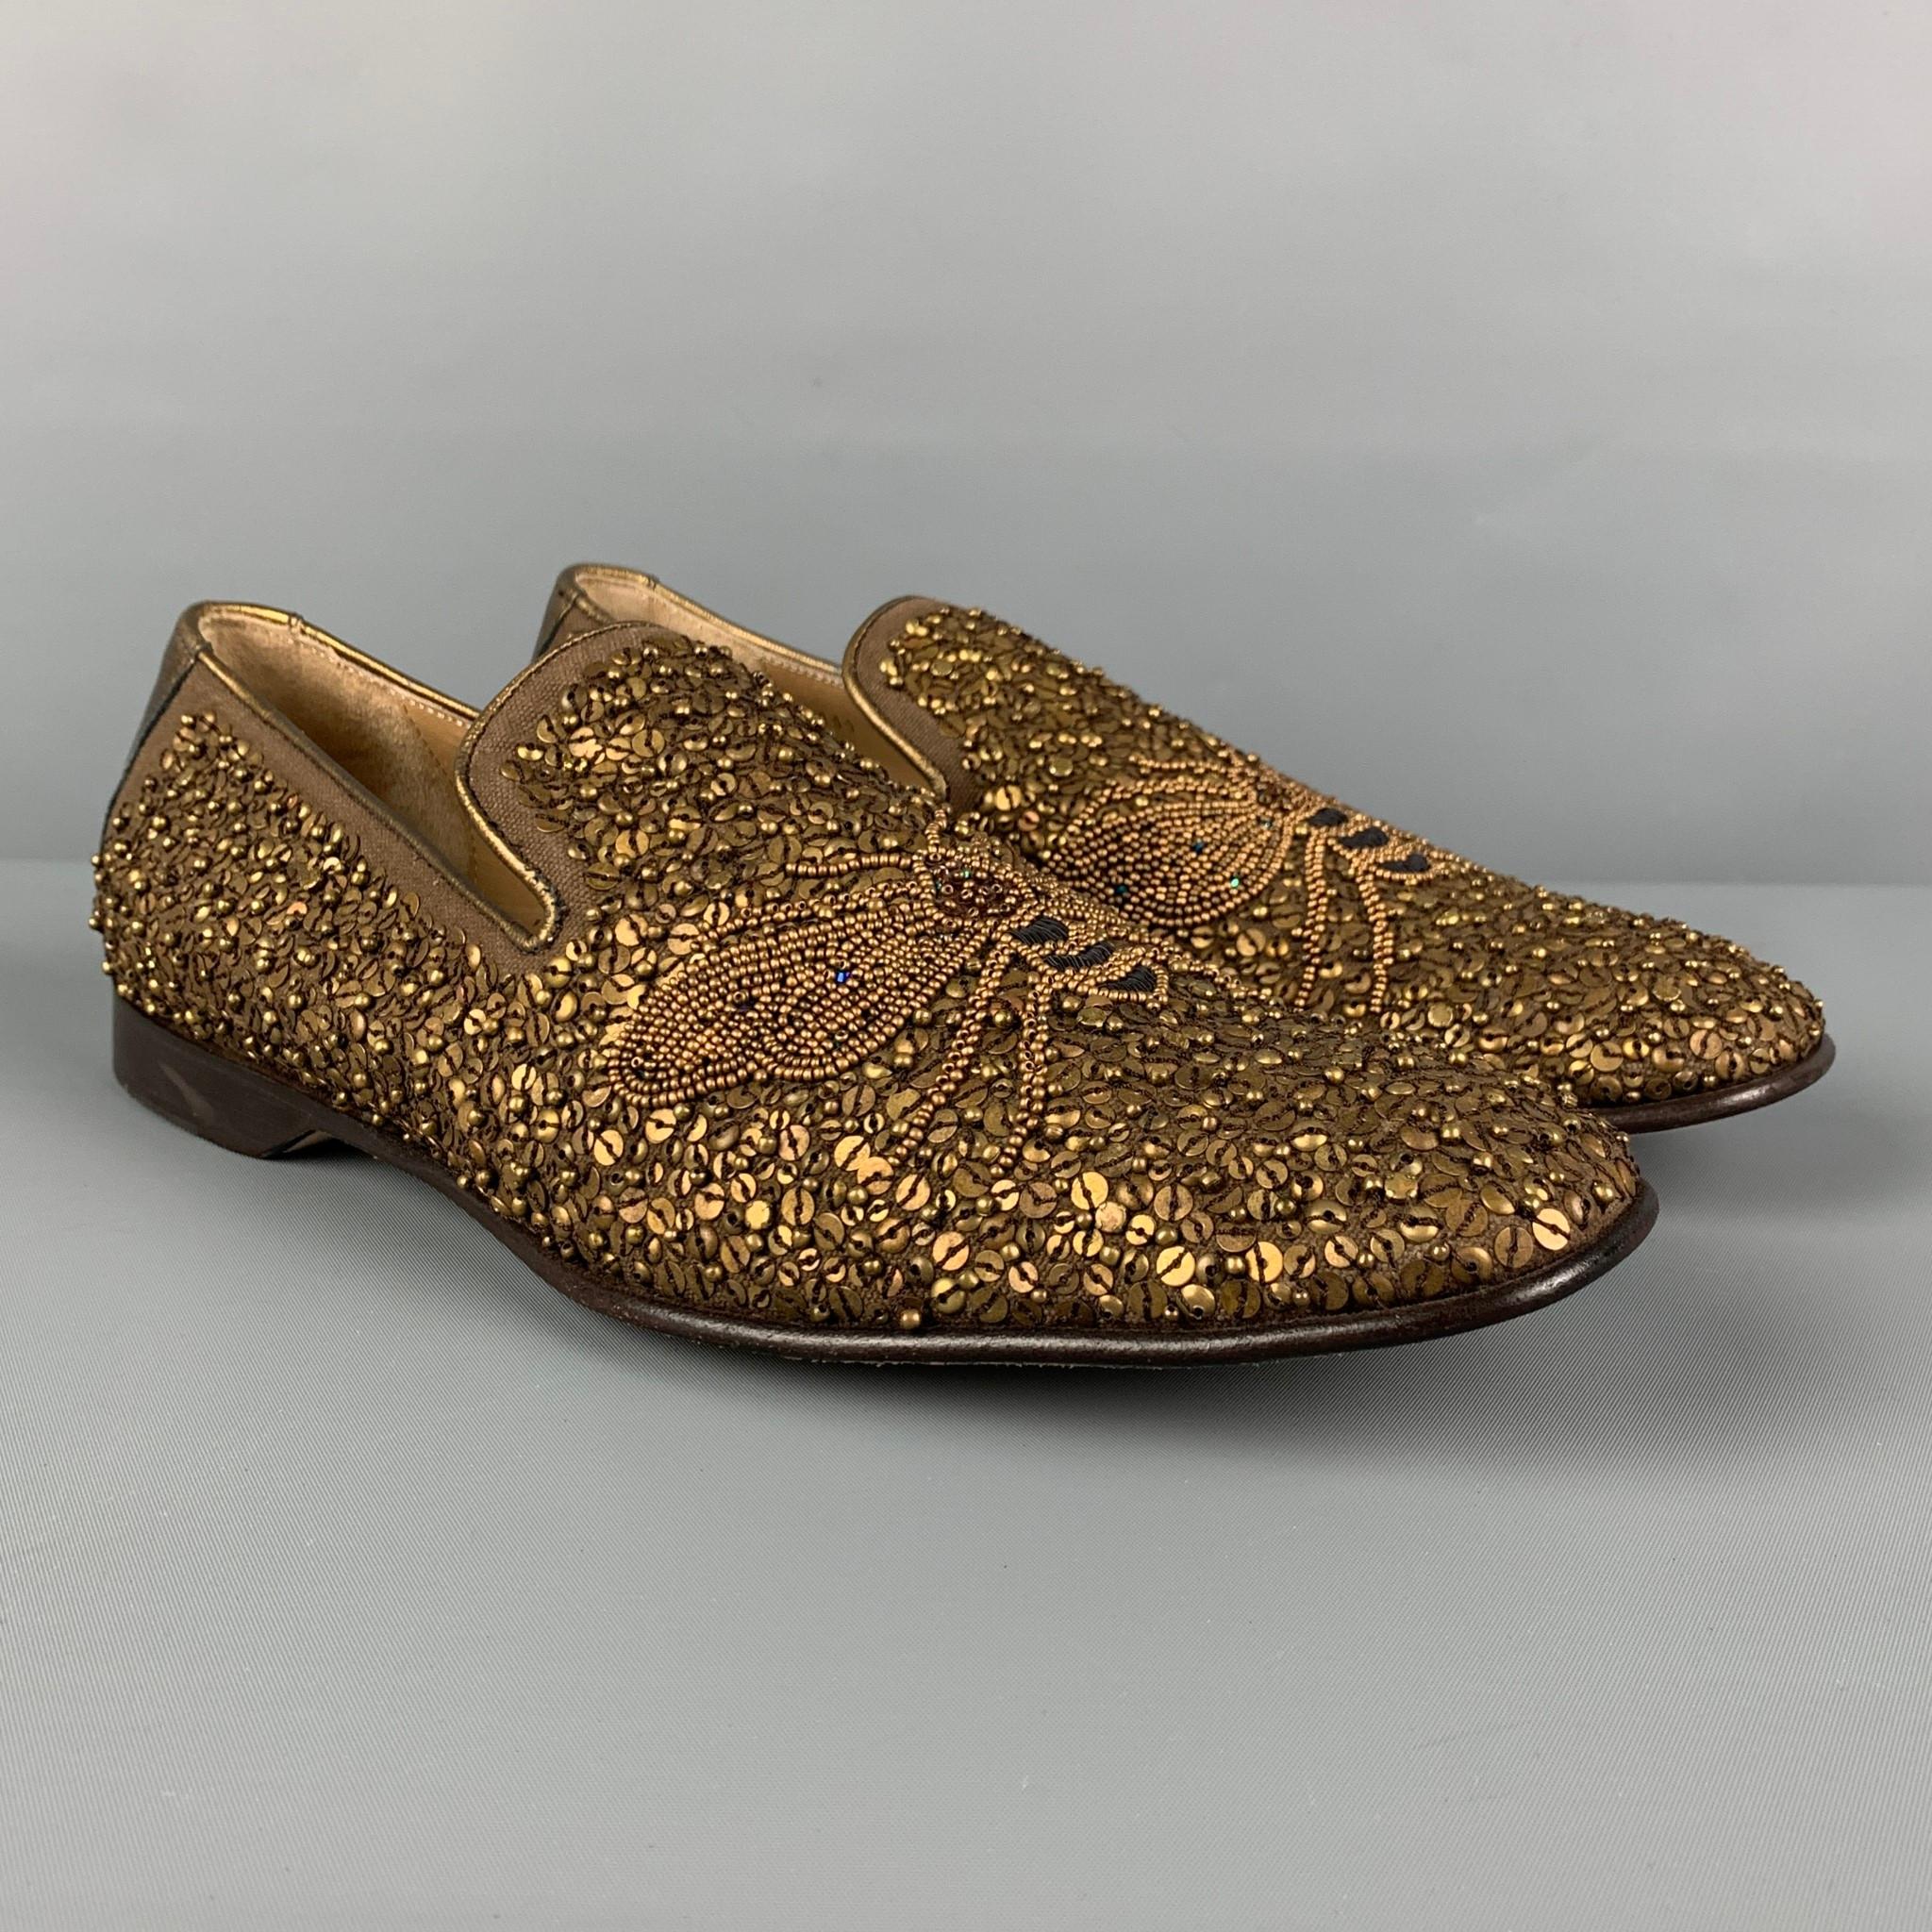 DONALD J PLINER loafers comes in a gold & brown sequined leather featuring a butterfly design and a slip on style and a square toe. Made in Italy. 

Very Good Pre-Owned Condition.
Marked: 9 M

Outsole: 12 in. x 4 in. 

 